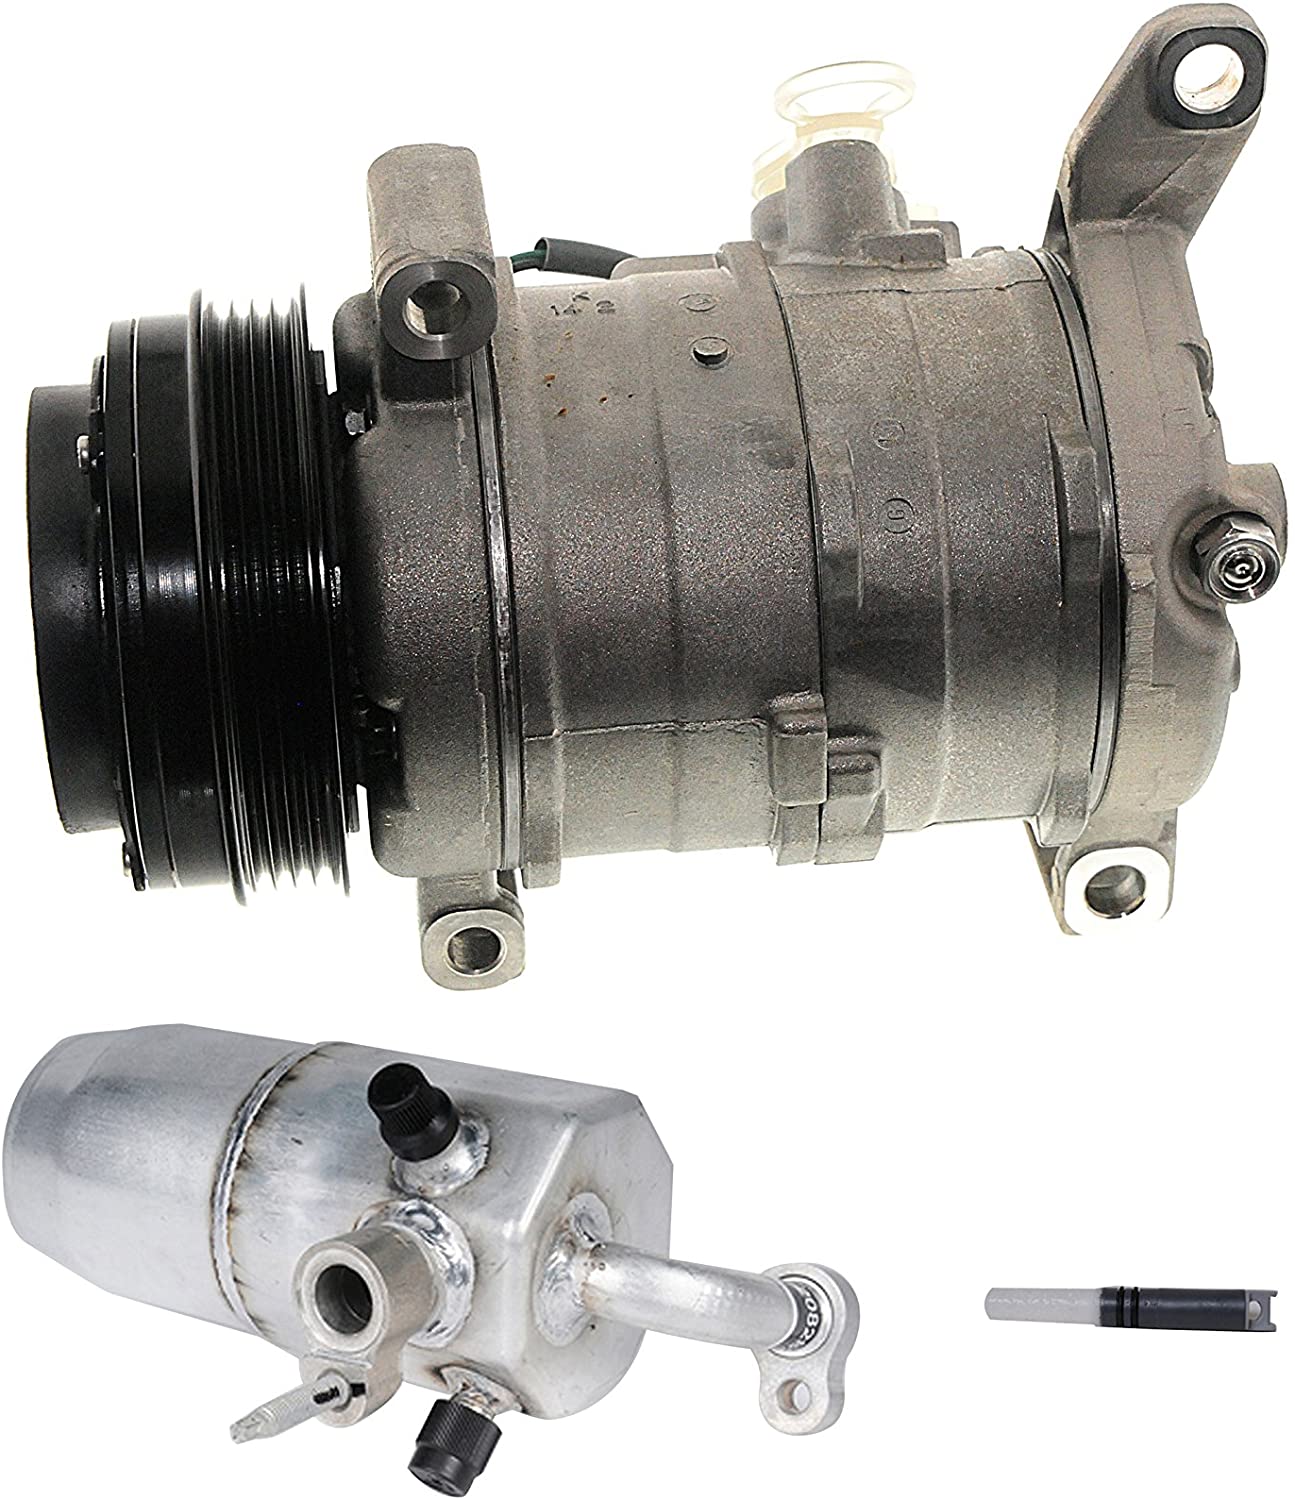 ACDelco K-1022 A/C Kits Air Conditioning Compressor and Component Kit